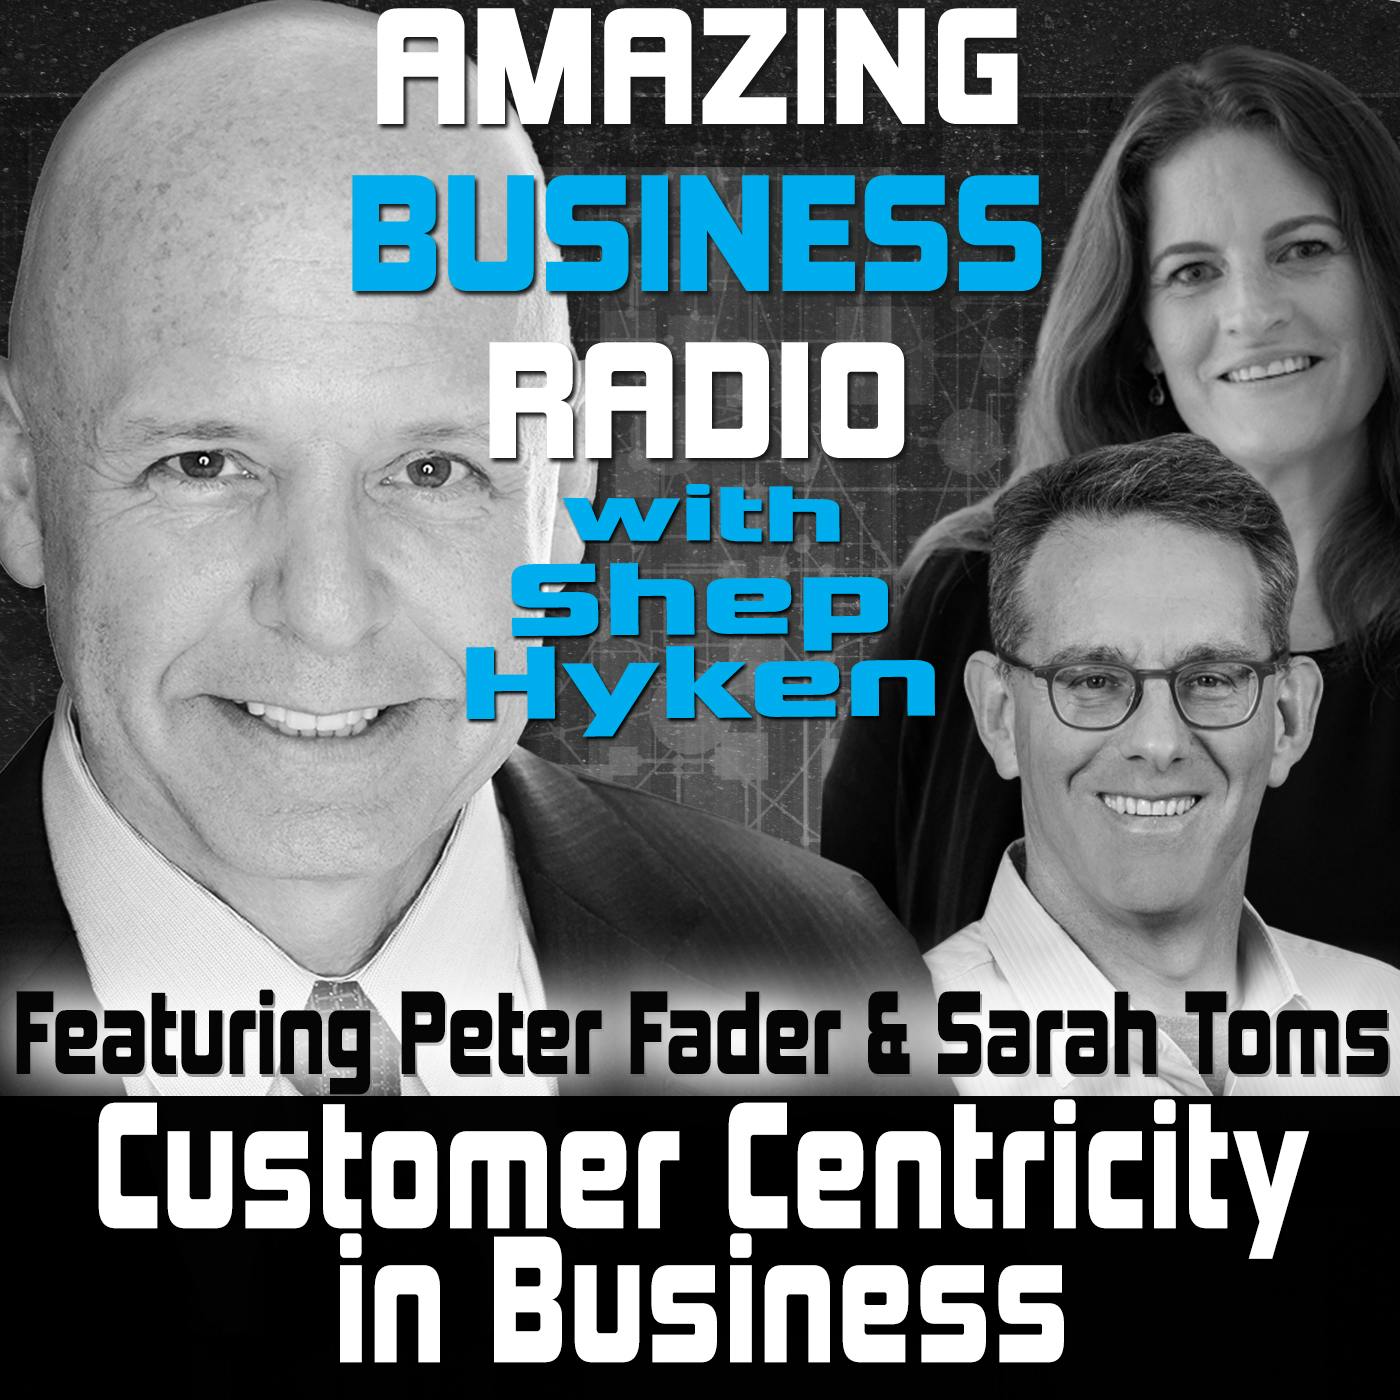 Customer Centricity in Business Featuring Guests Peter Fader & Sarah Toms